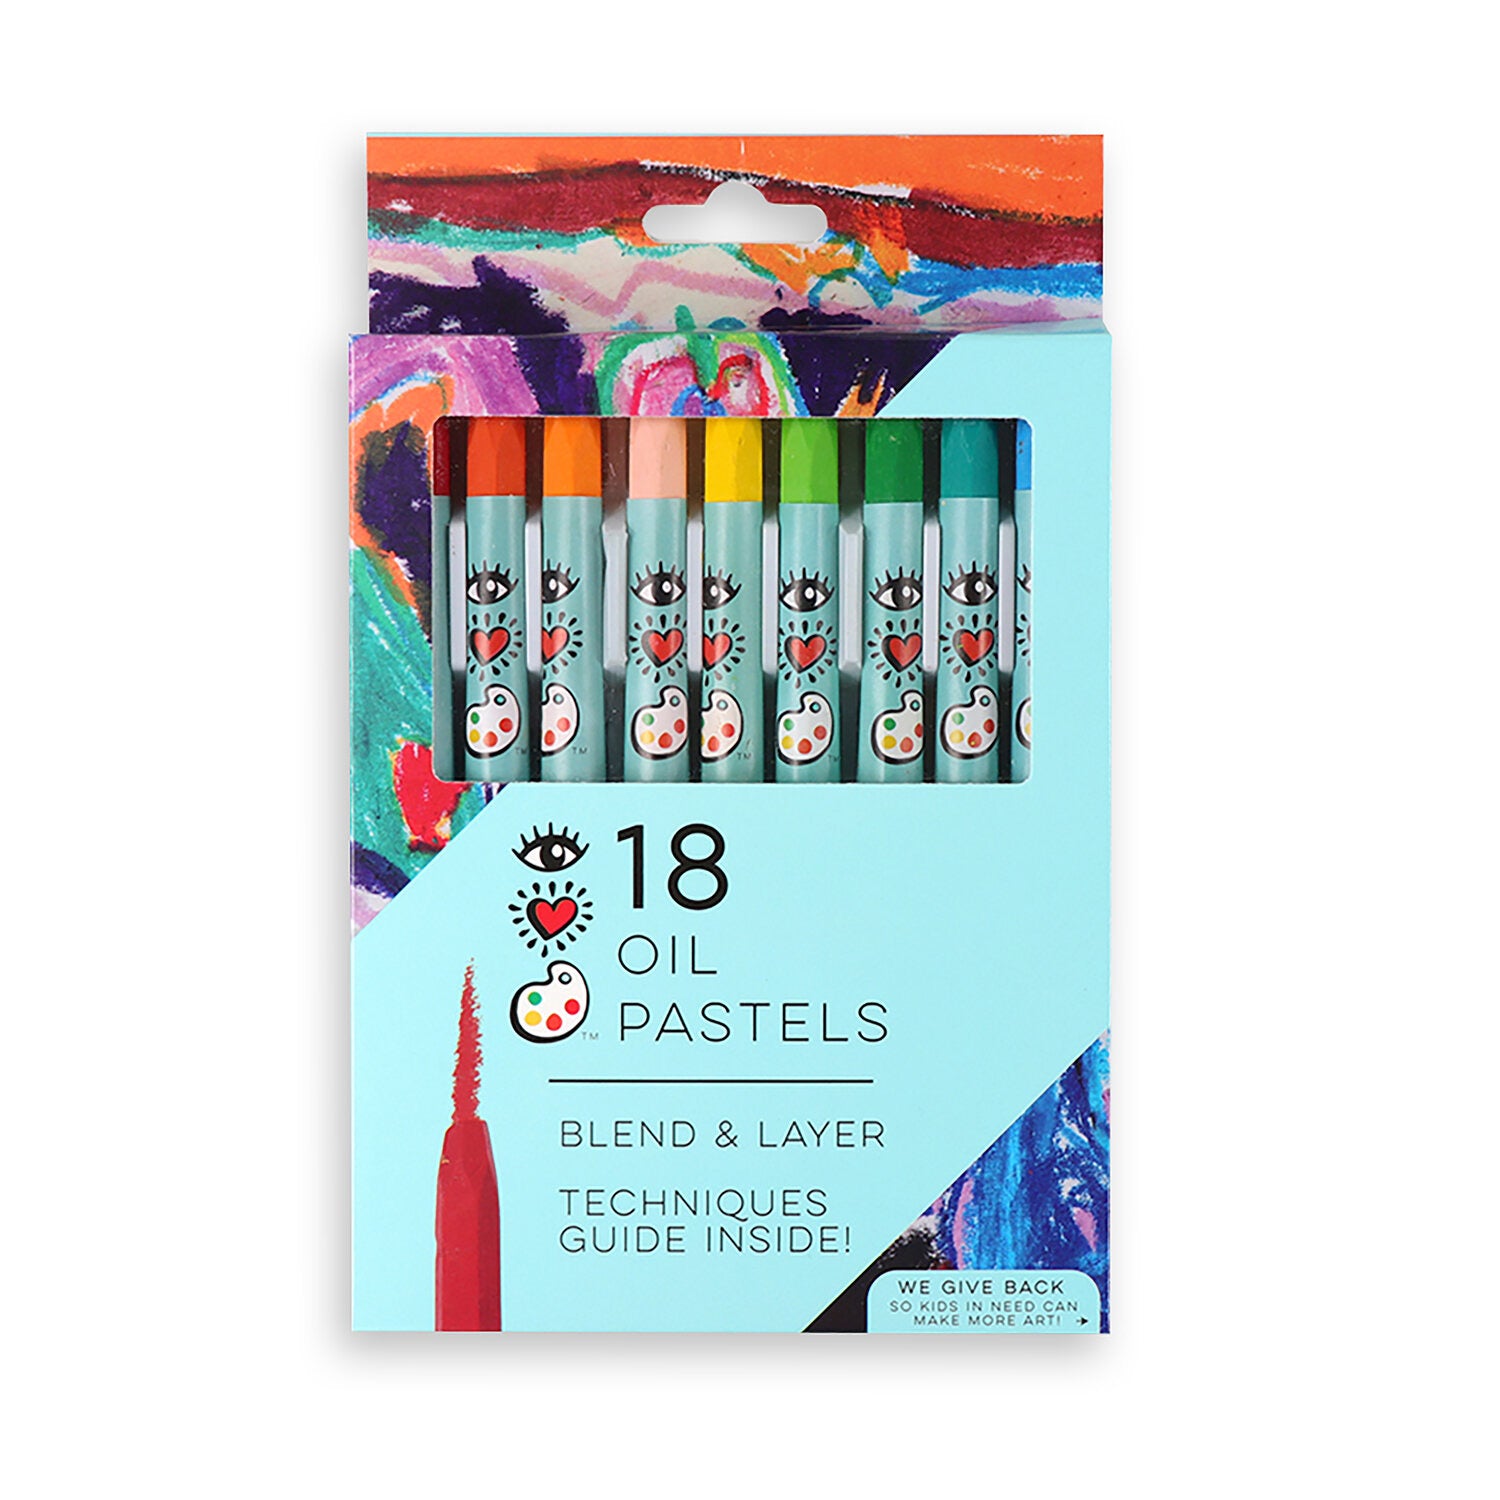 18 Oil Pastels by Bright Stripes #4018-18